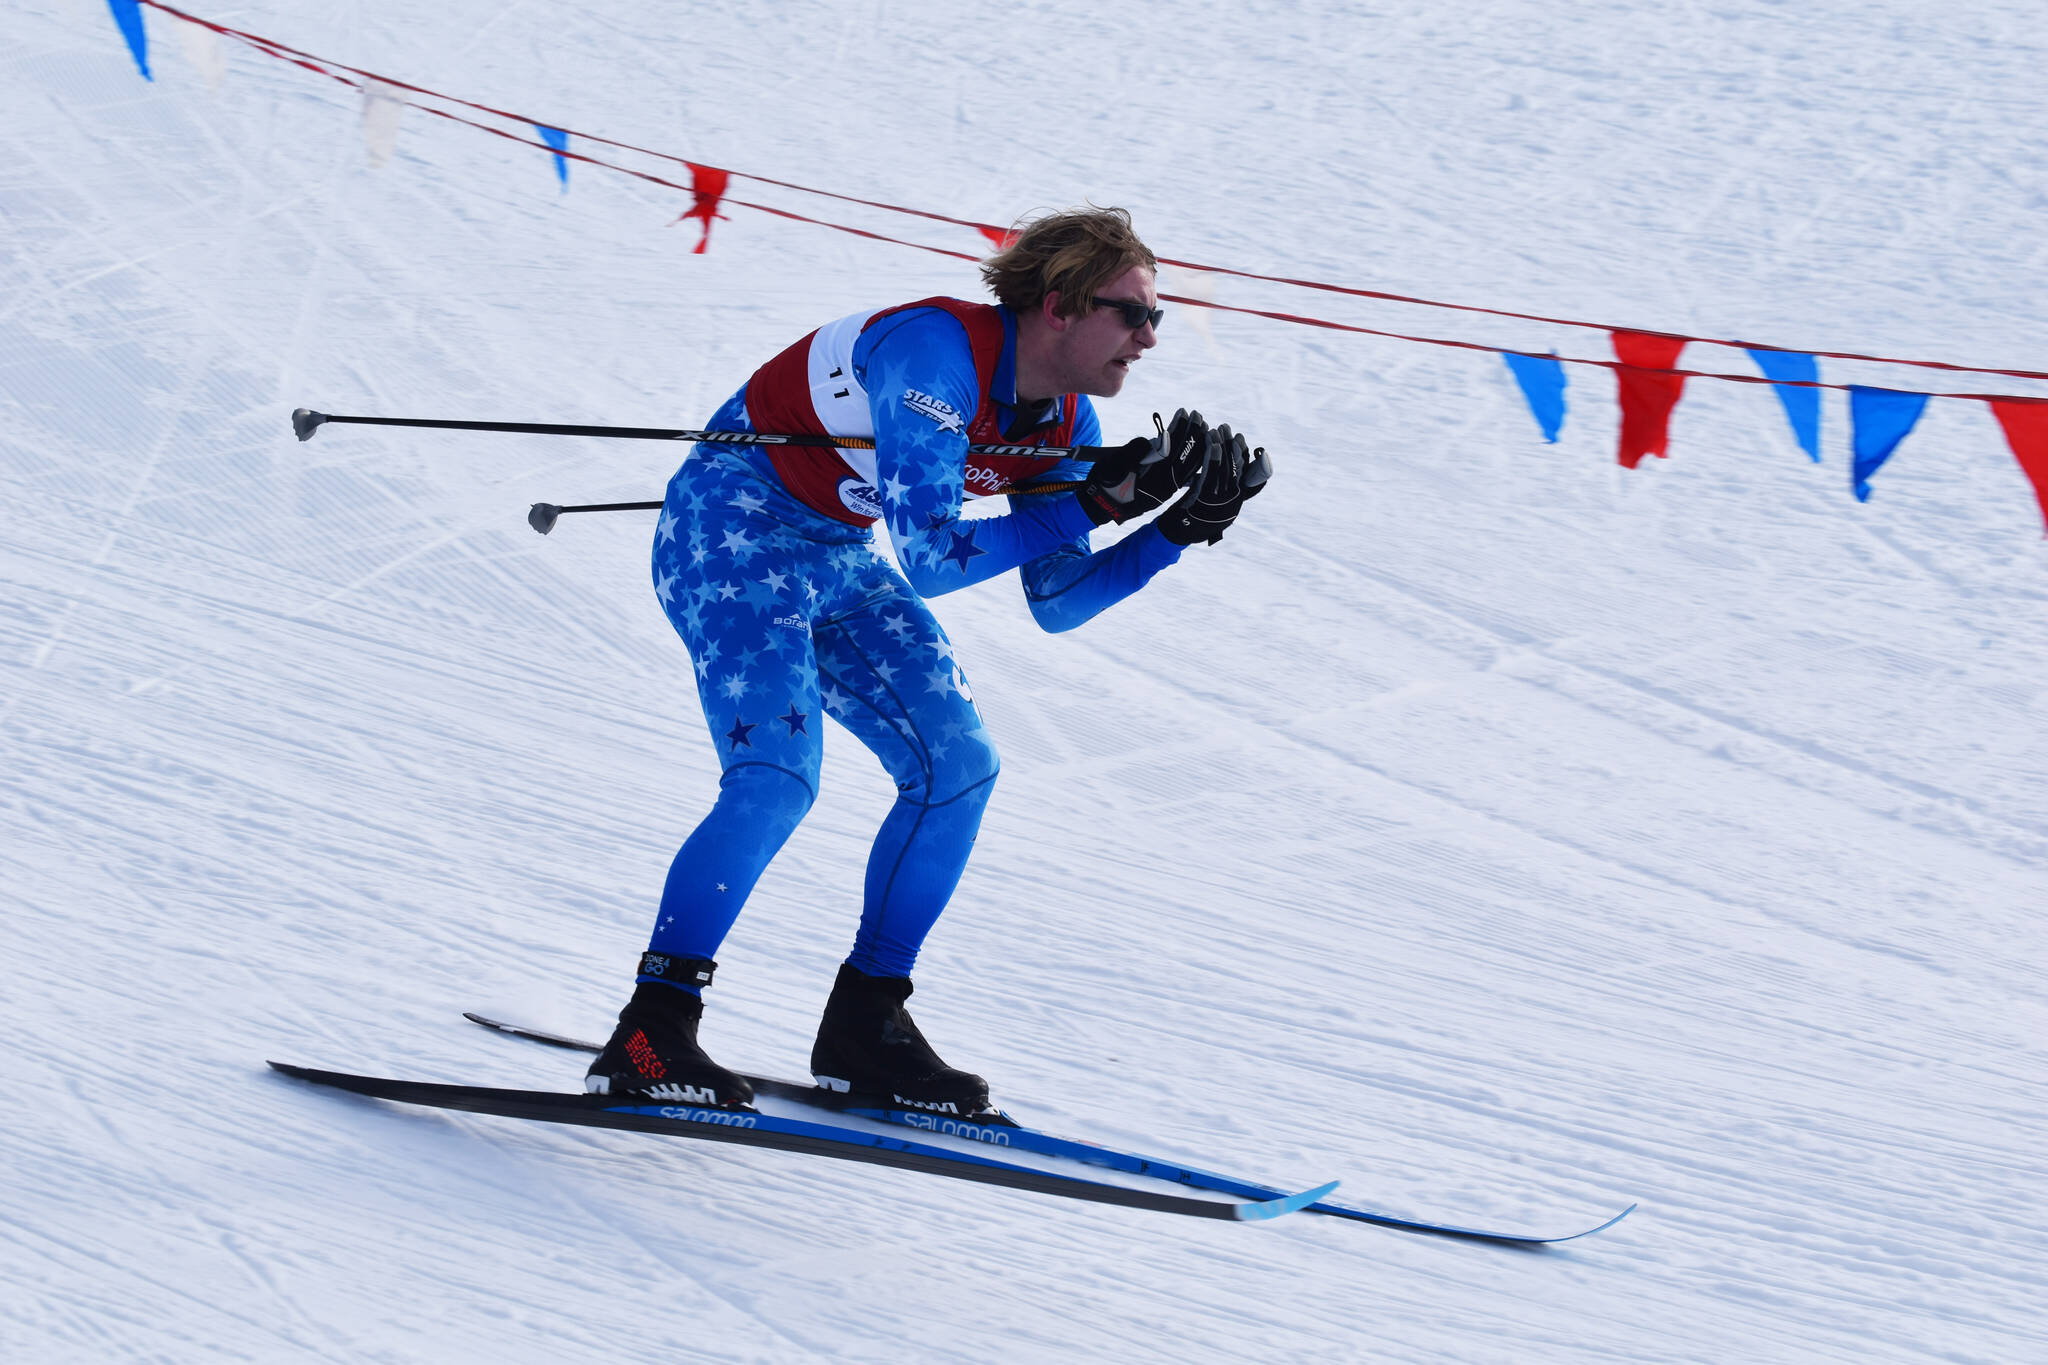 Soldotna’s Andrew Cox tucks for a downhill during the first leg of the boys 4x5-kilometer relay at the ASAA State Nordic Ski Championships at Kincaid Park in Anchorage, Alaska, on Saturday, Feb. 25, 2023. (Jake Dye/Peninsula Clarion)